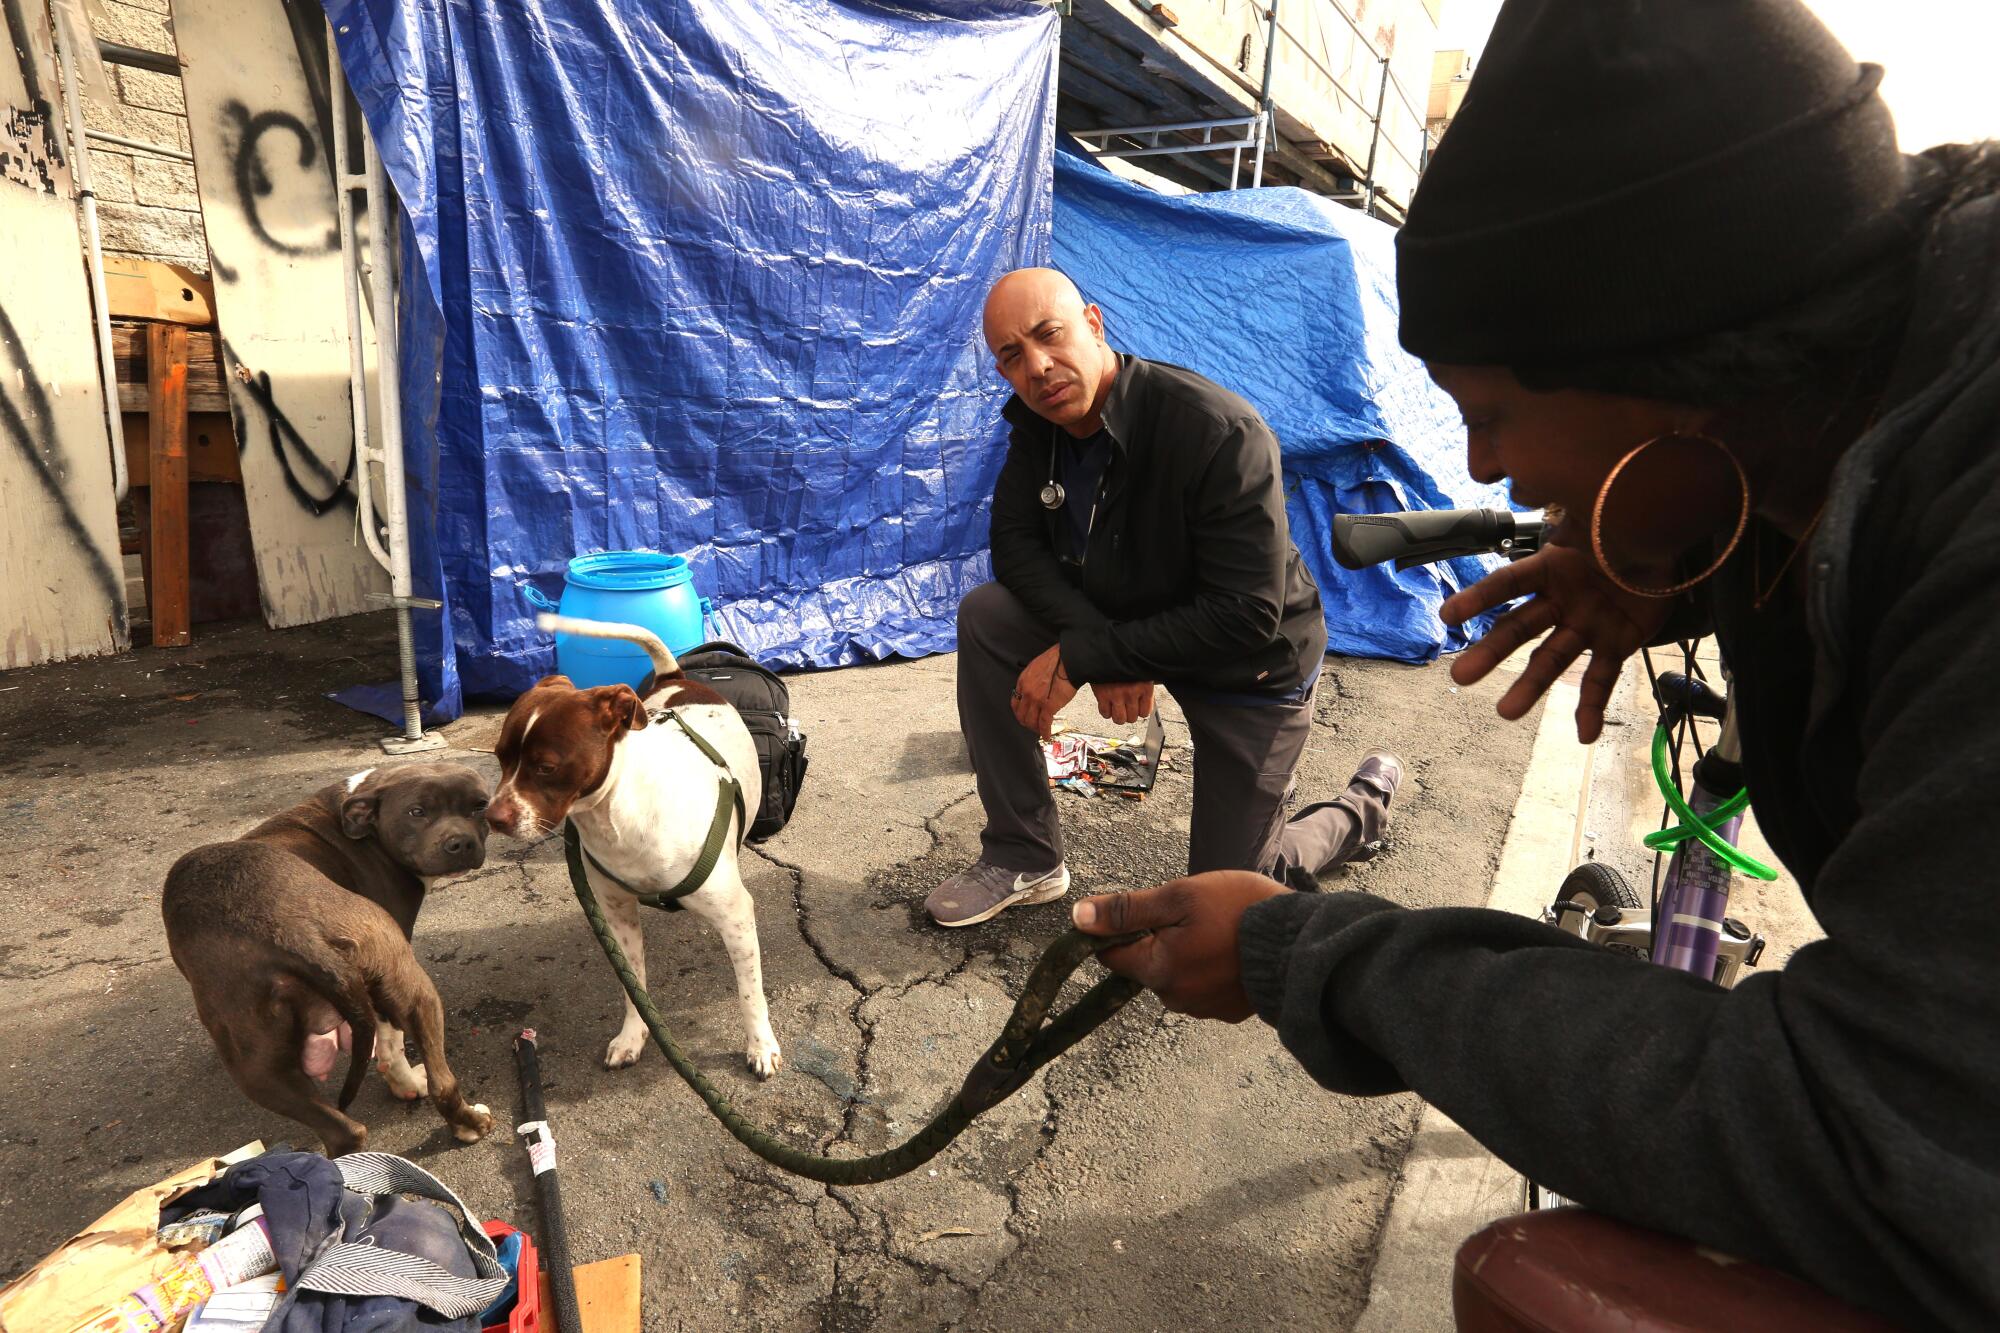 A veterinarian  talks with a homeless woman about the health of her dog in Skid Row.